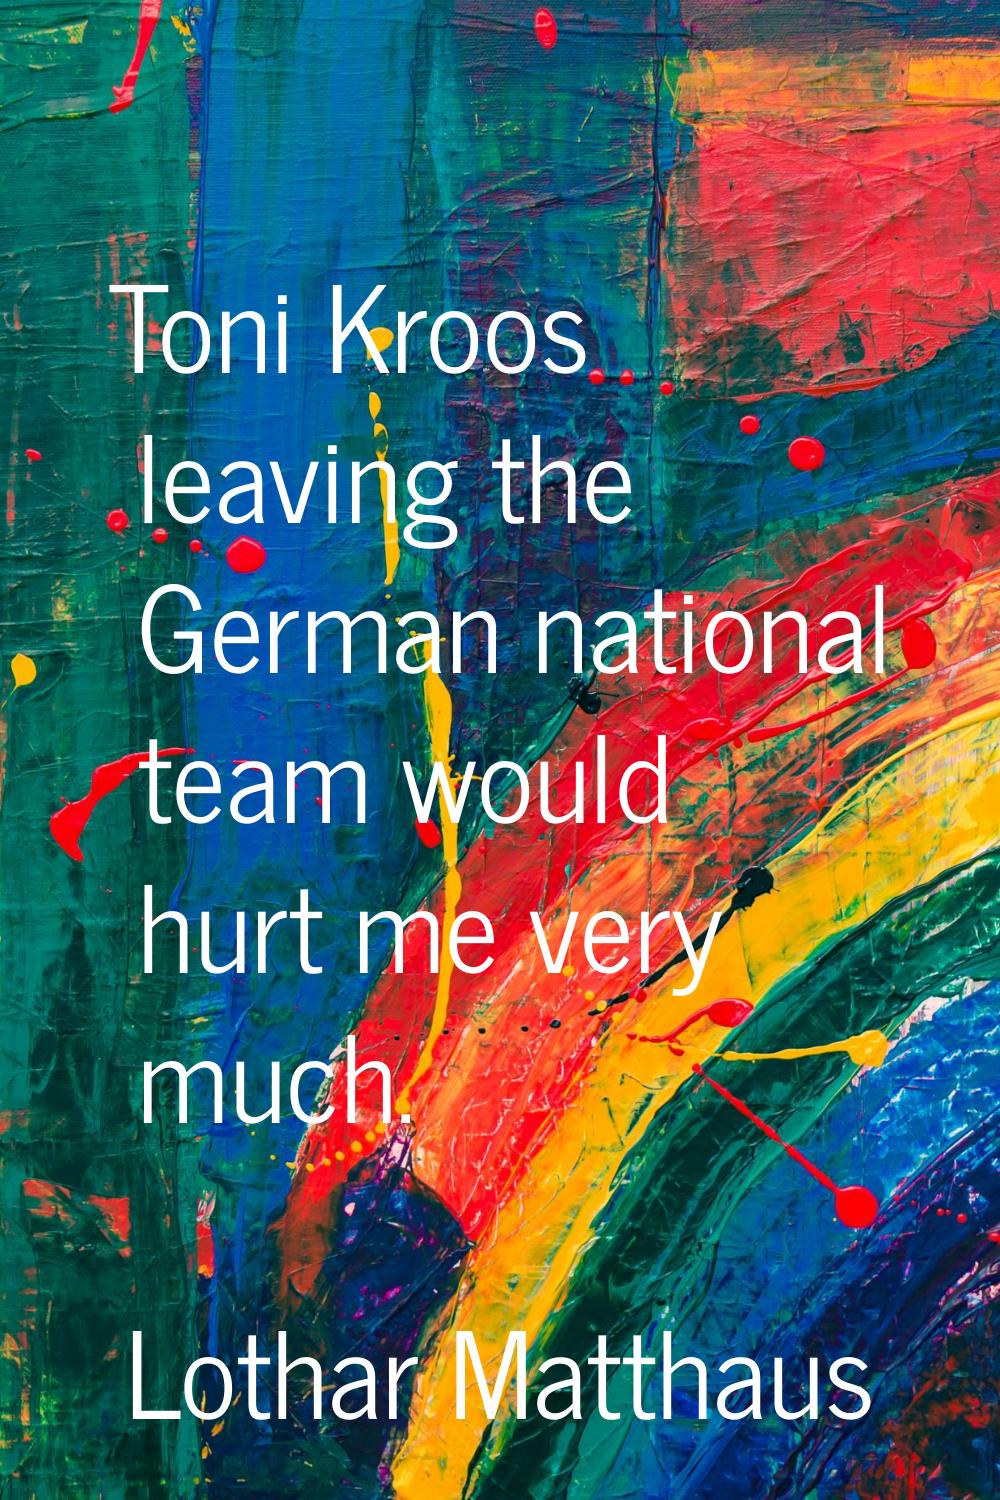 Toni Kroos leaving the German national team would hurt me very much.